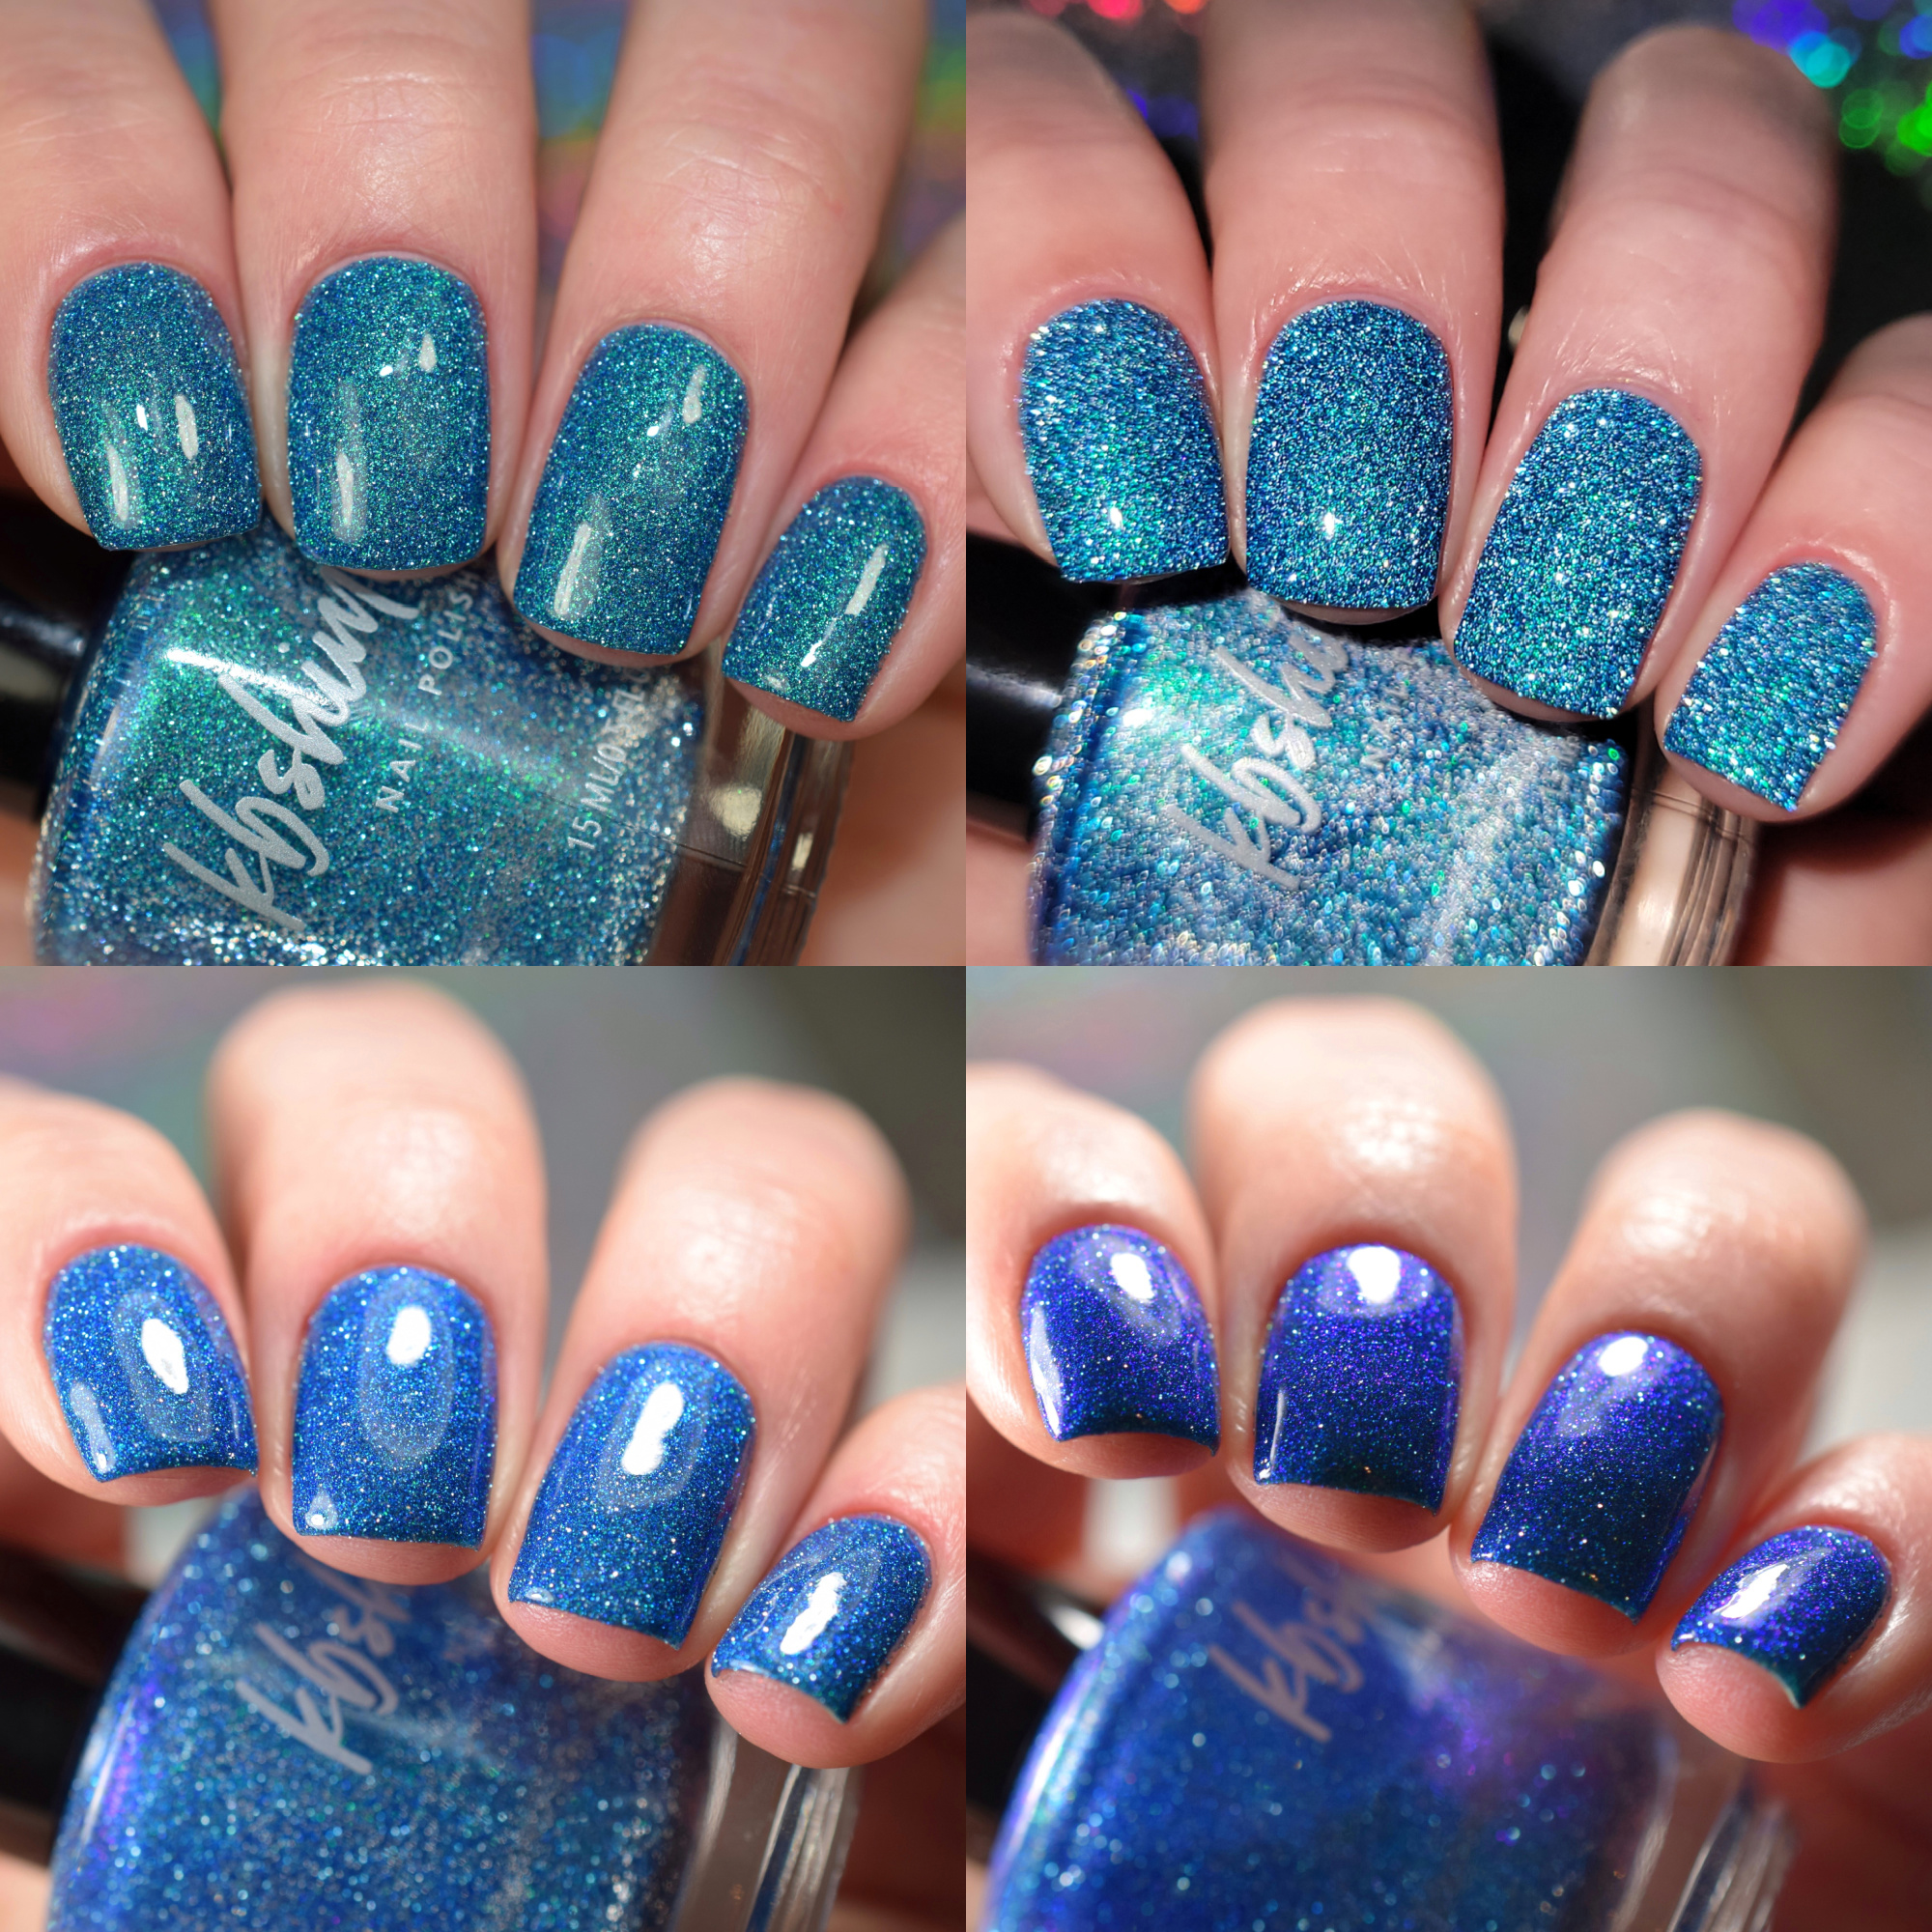 KBShimmer Put A Ring On It Holo Glow Flake Nail Polish